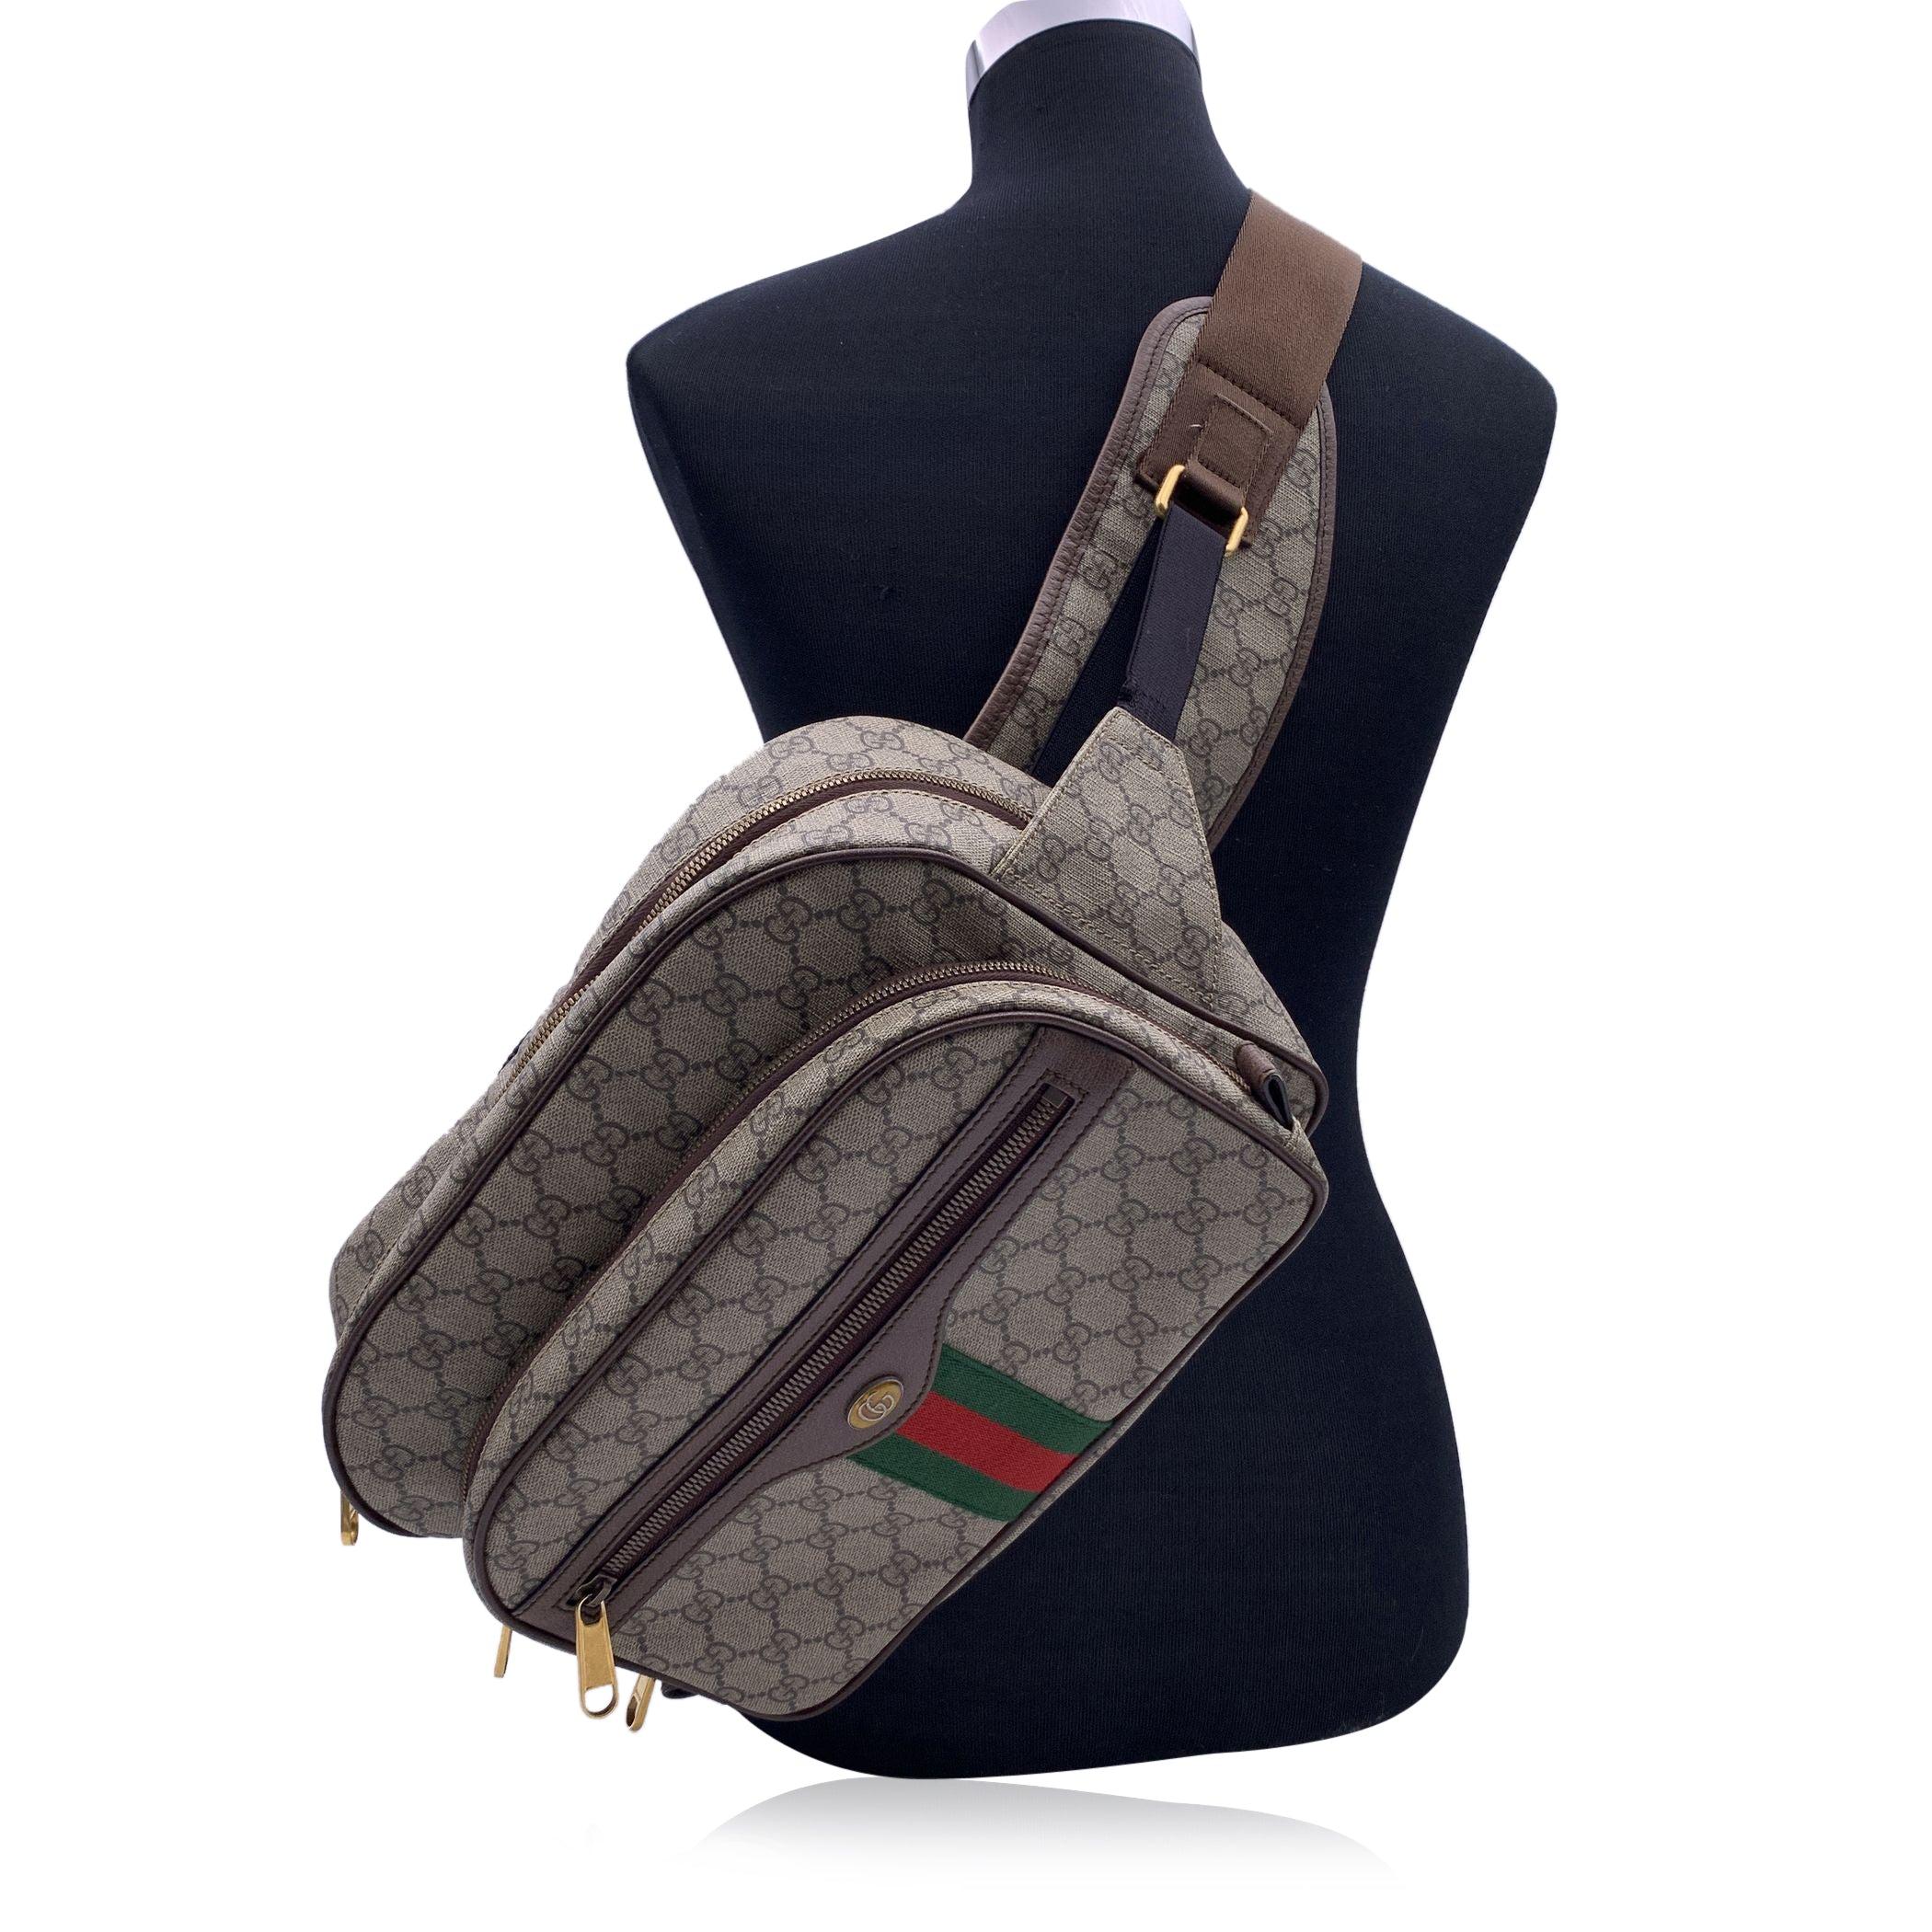 Beautiful large unisex Ophidia waist bag by Gucci. Crafted of GG Supreme canvas with brown leather trims. This model is very versatile; may be worn as belt bag, but also crossbody (as a backpack). Green/red/green stripes on the front and GG enamel